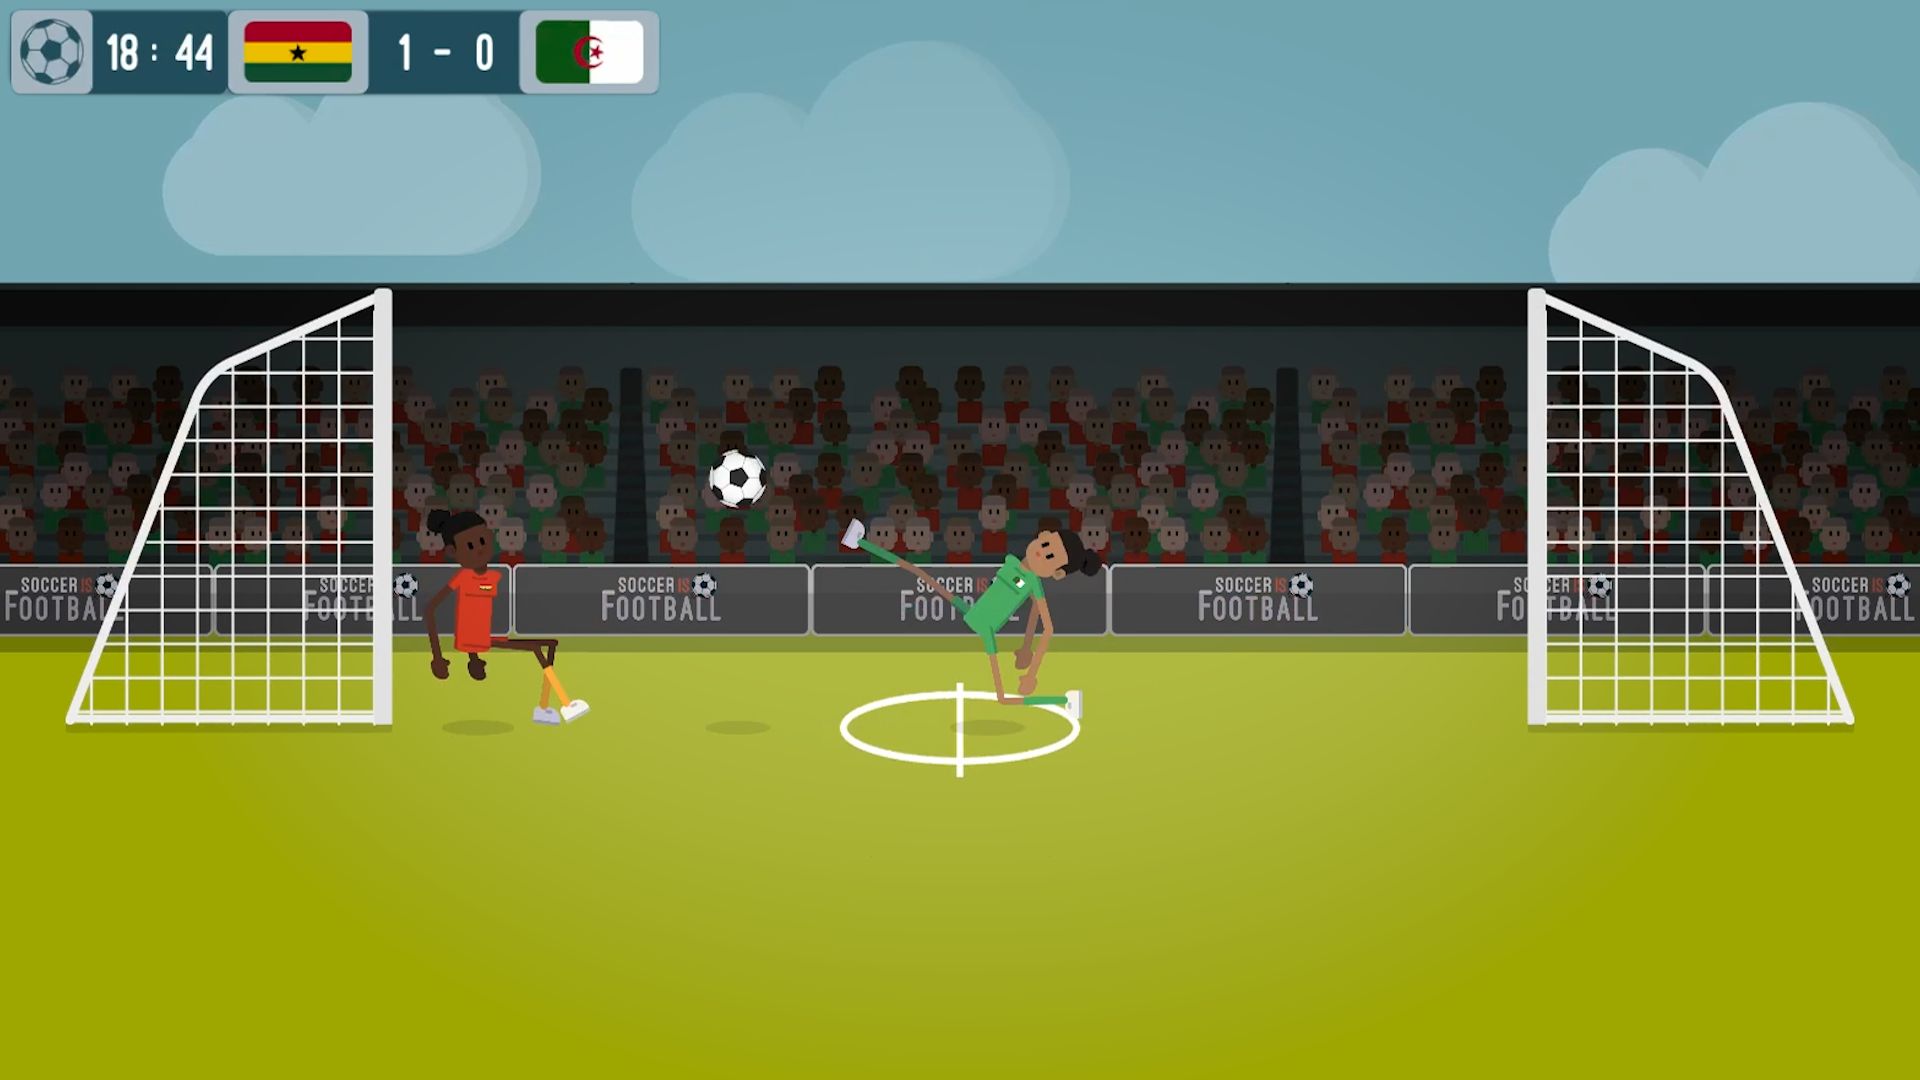 Soccer Is Football - Android game screenshots.